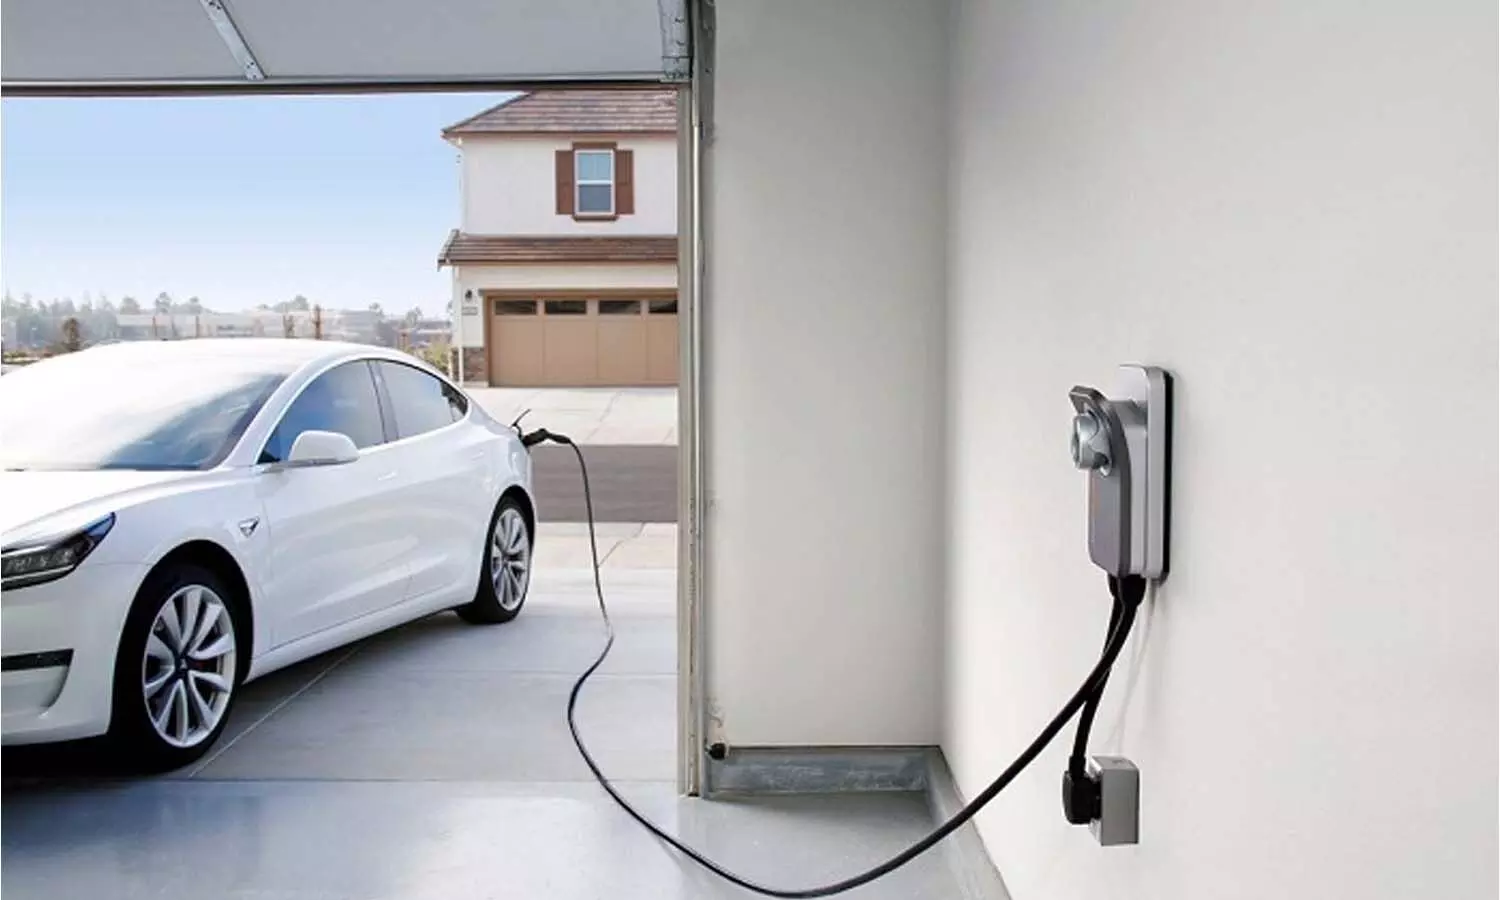 Know the right way to charge the electric vehicle, otherwise many problems may arise